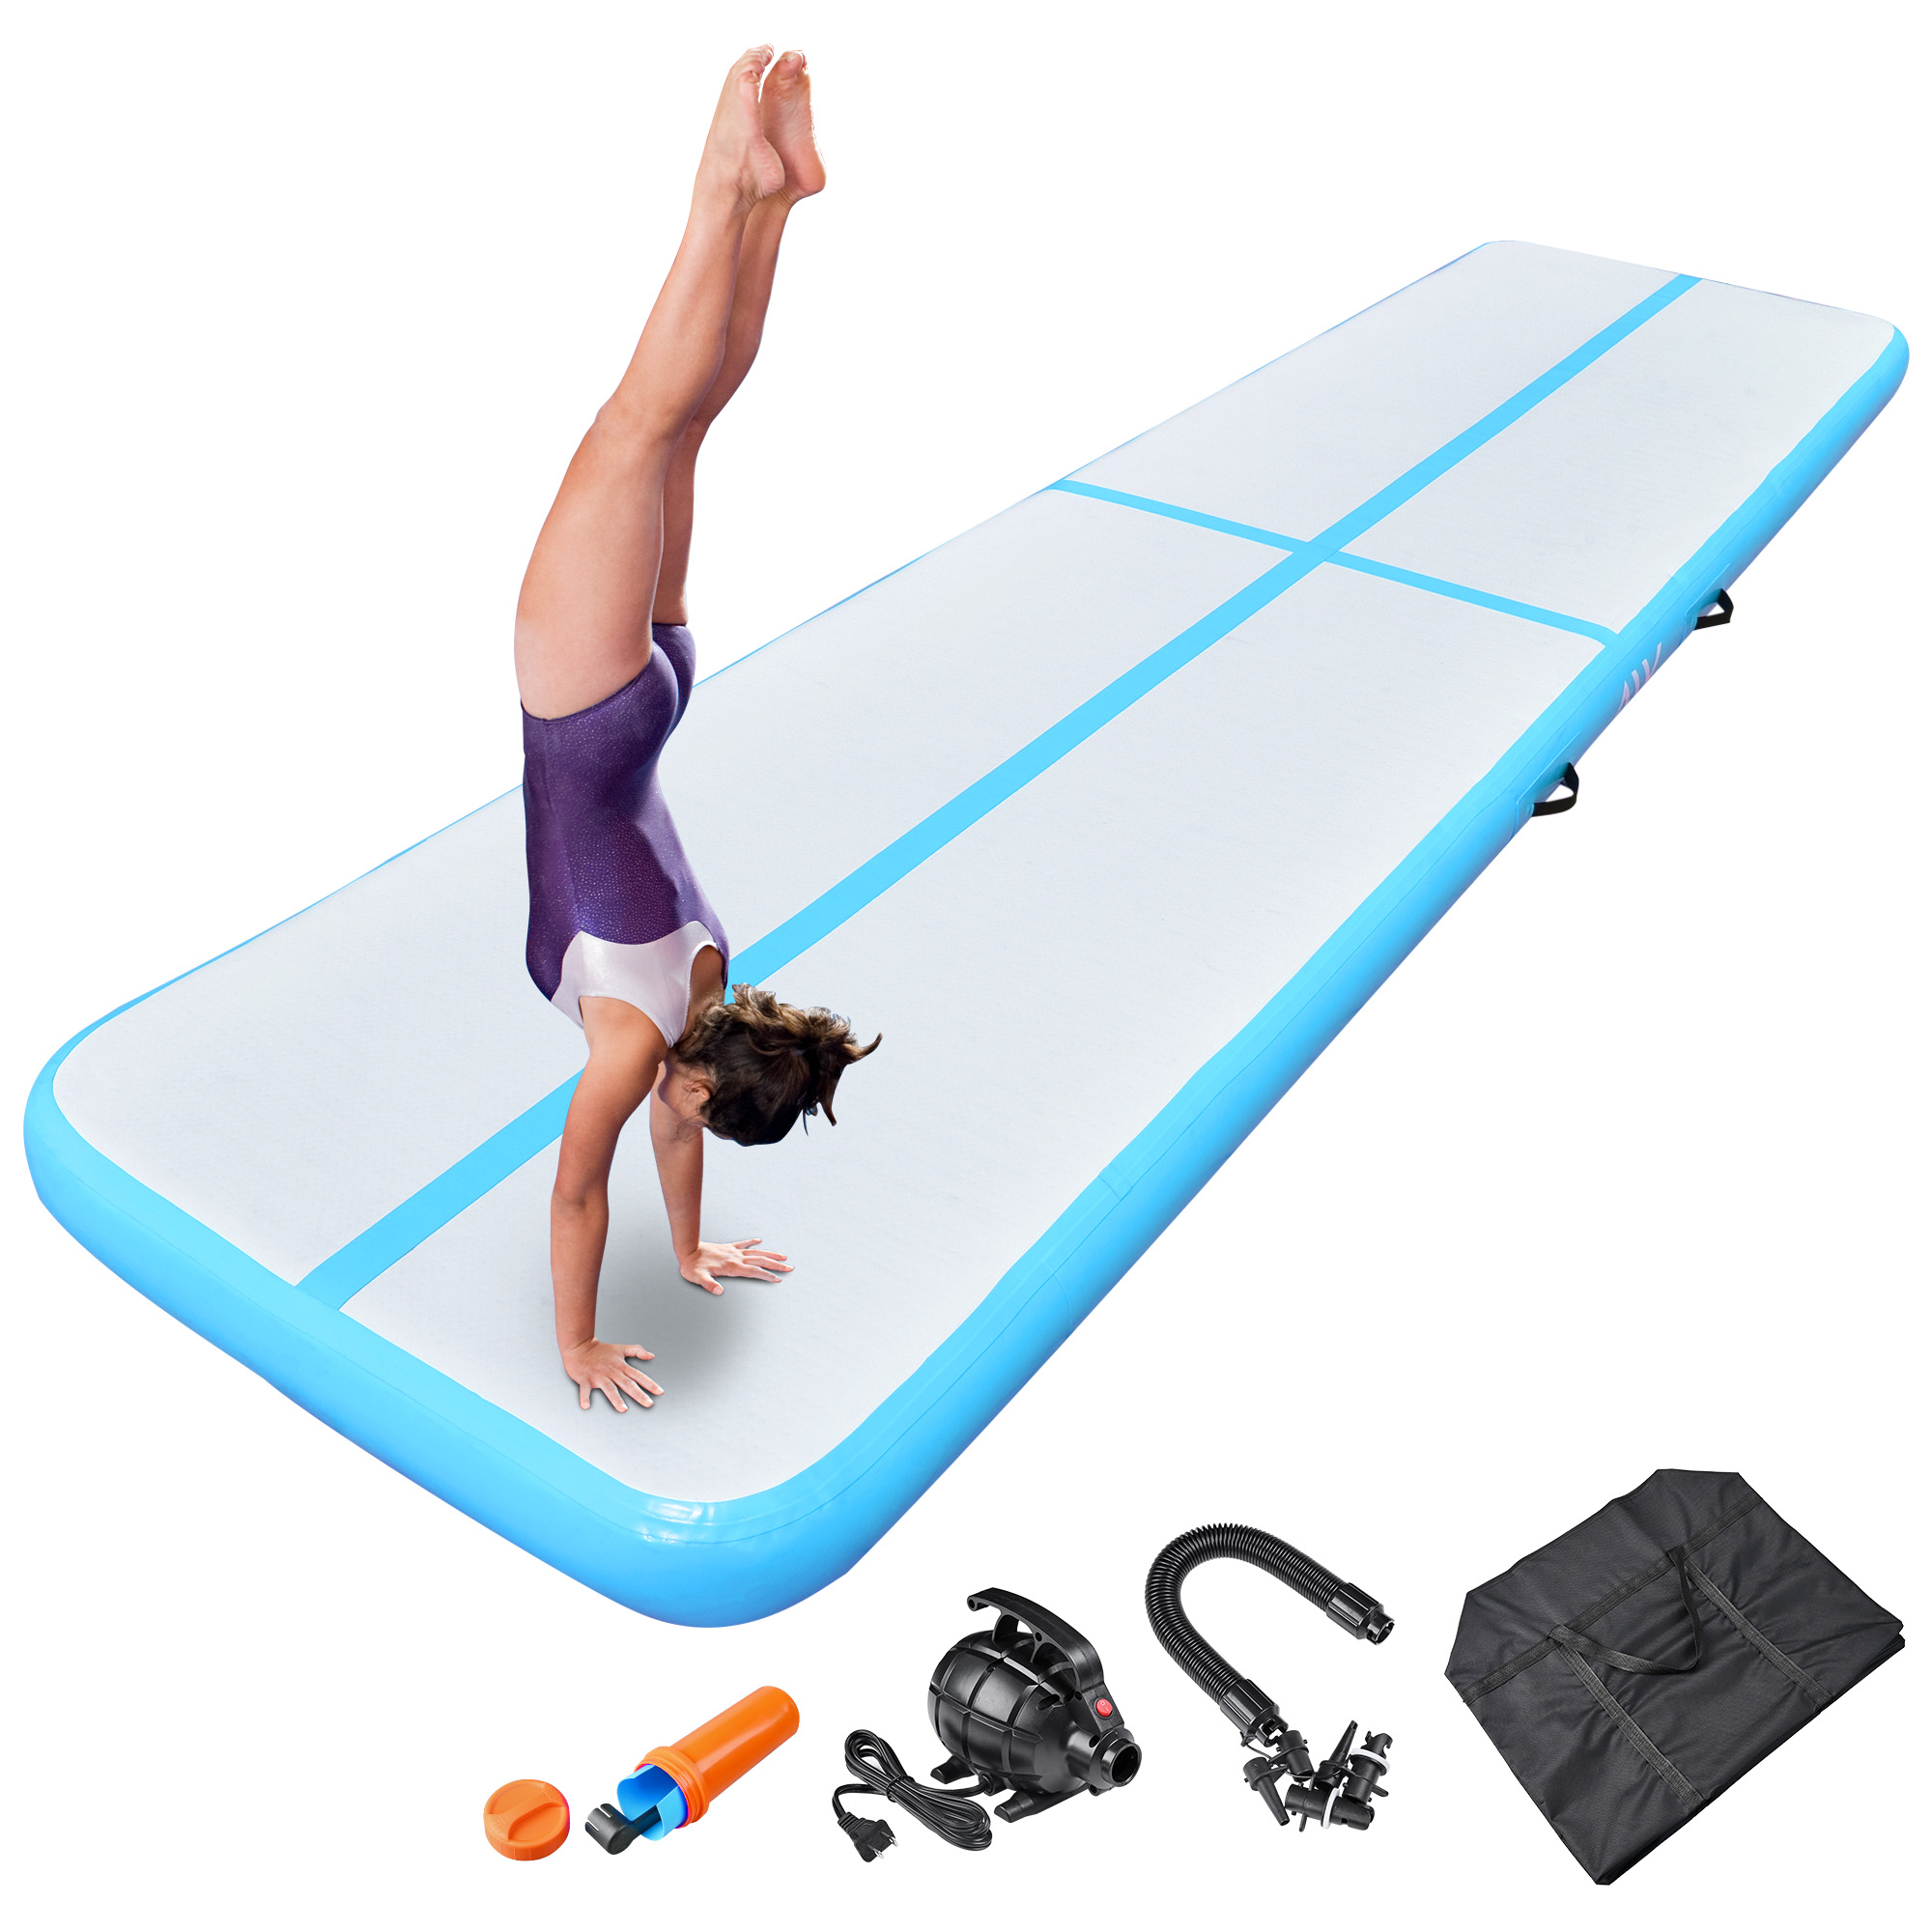 Looking to Buy The Best Outdoor Gymnastic Mats. Here Are 15 Key Things to Consider